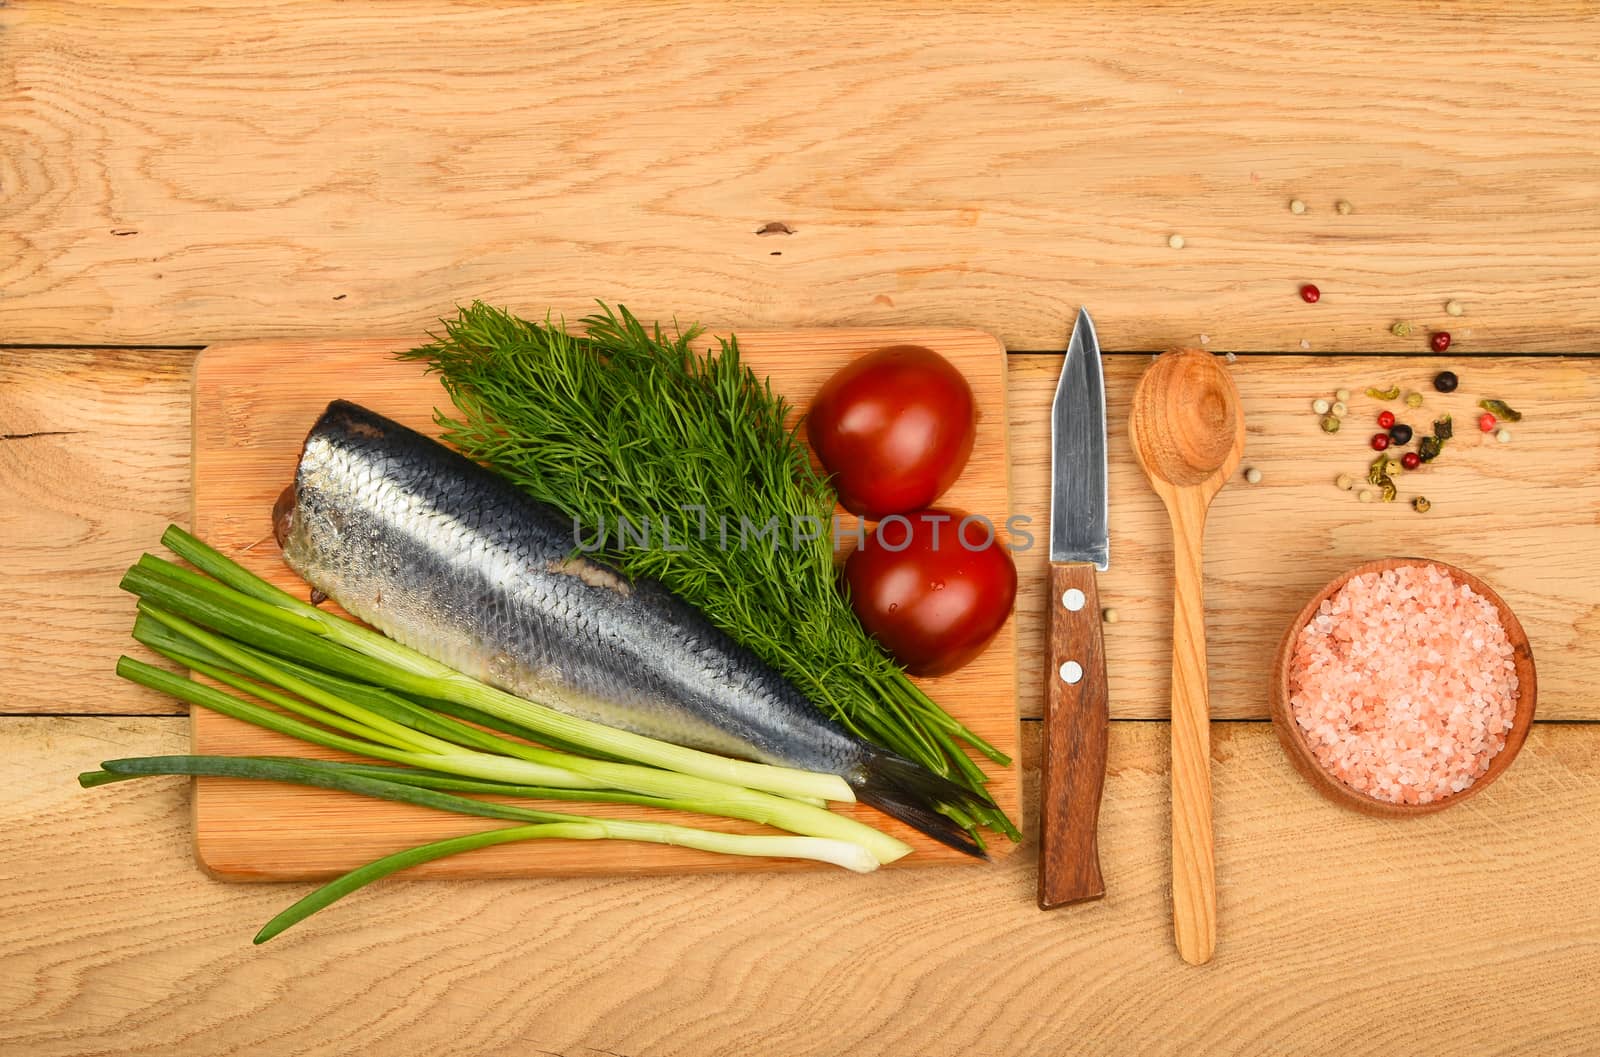 Herring double fillet with onion, dill and tomatoes on bamboo board win small knife, assorted peppercorns, pink salt in wooden scoop on vintage wooden table surface